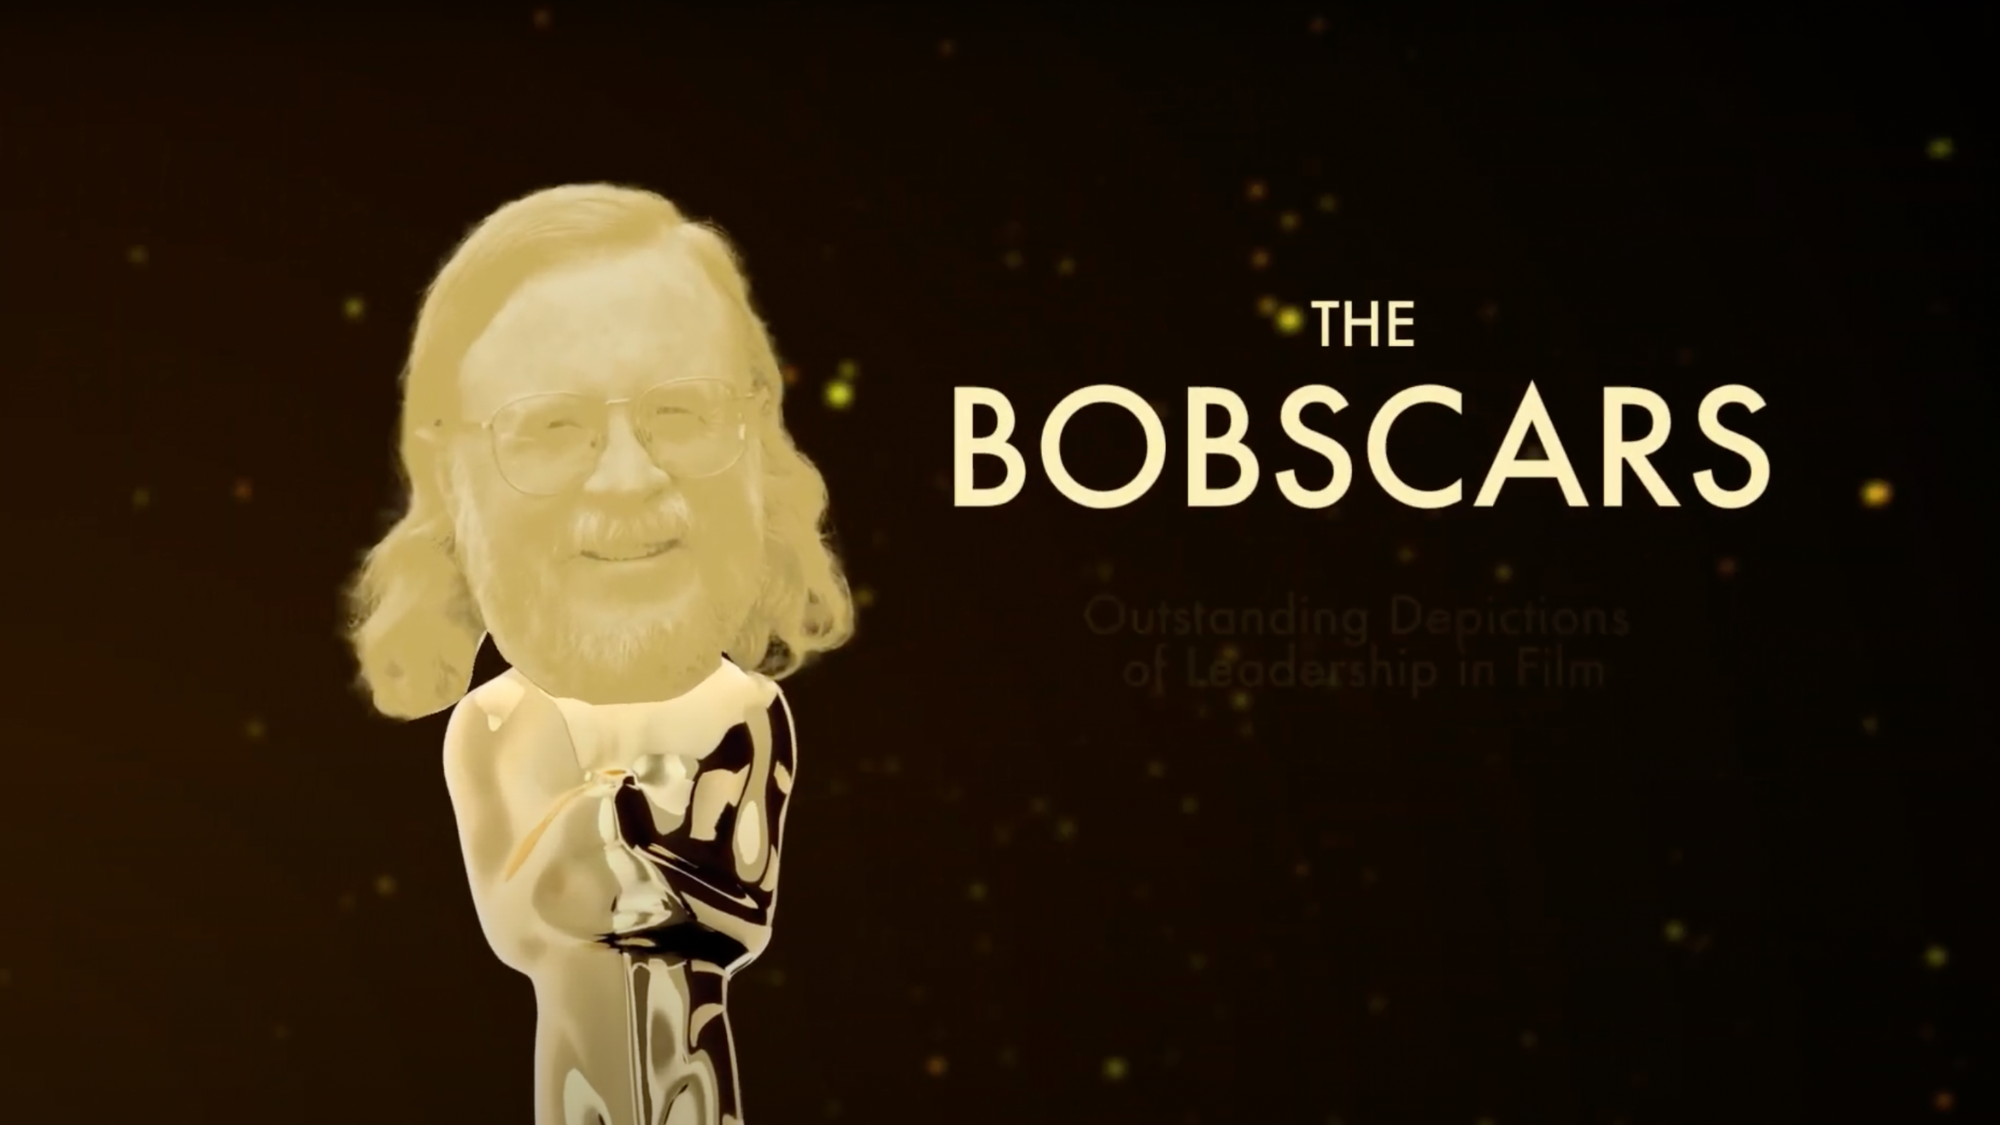 The Bobscars